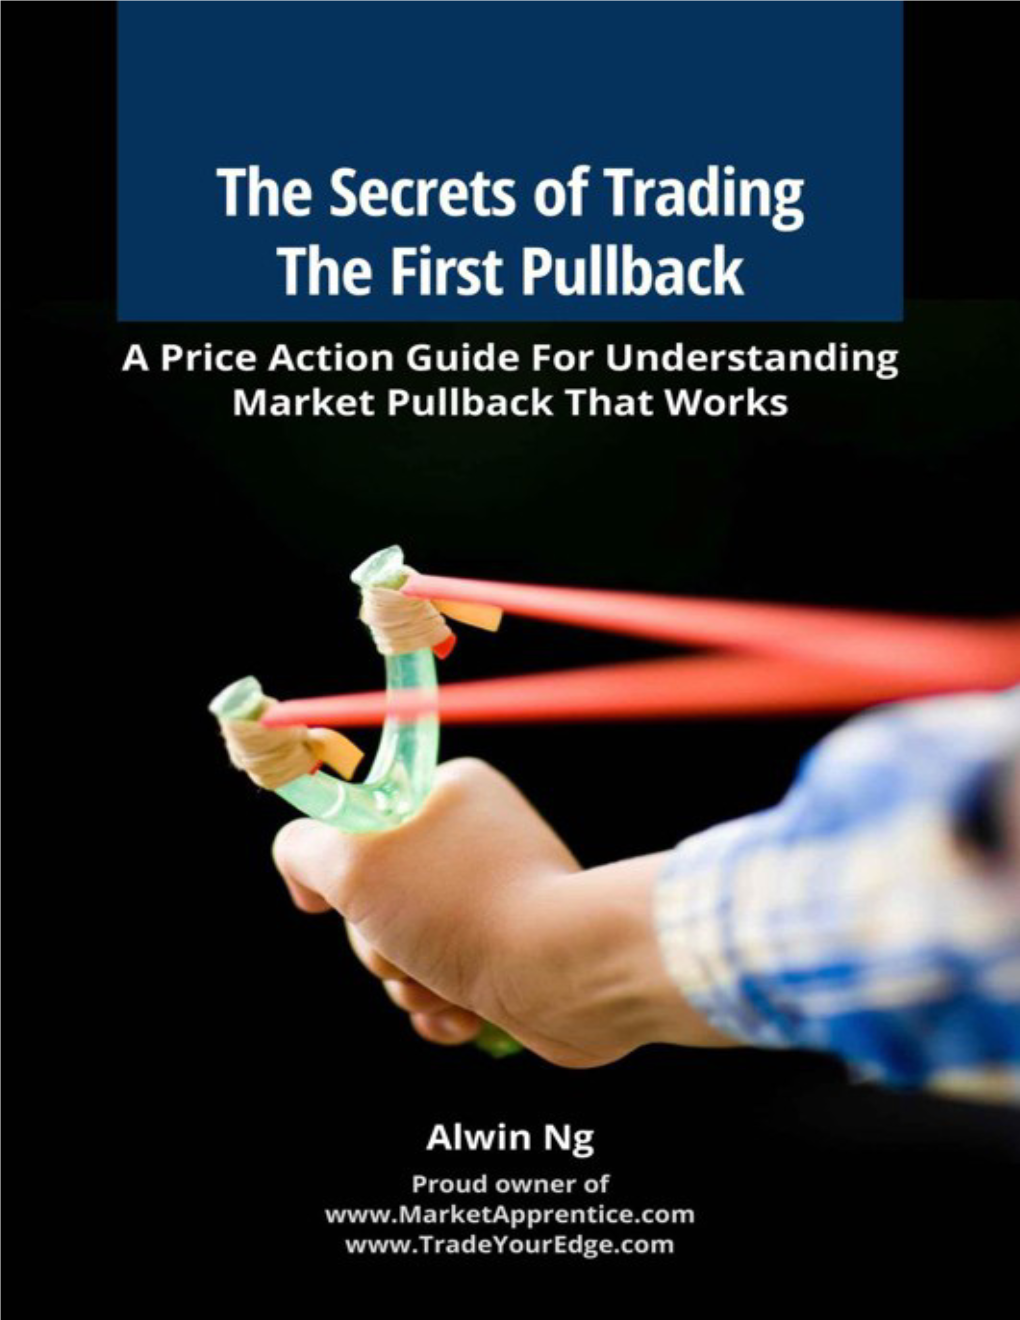 The Secrets of Trading the First Pullback: a Price Action Guide For